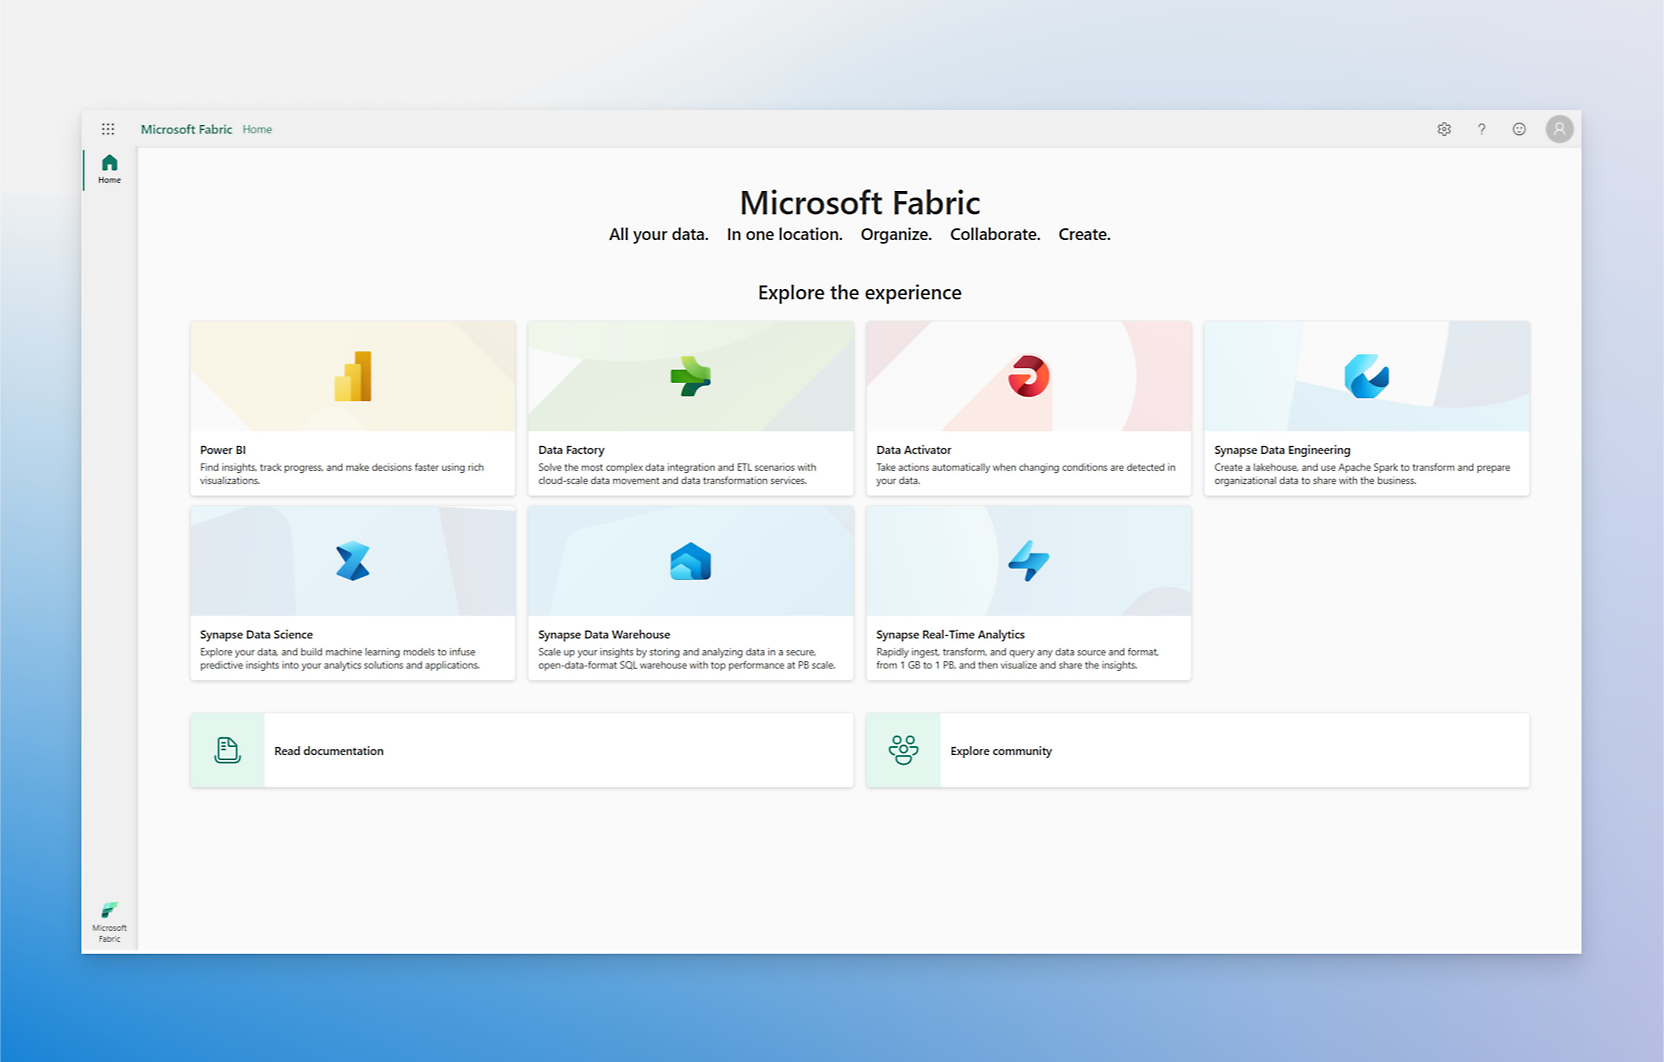 Landing page for Microsoft Fabric